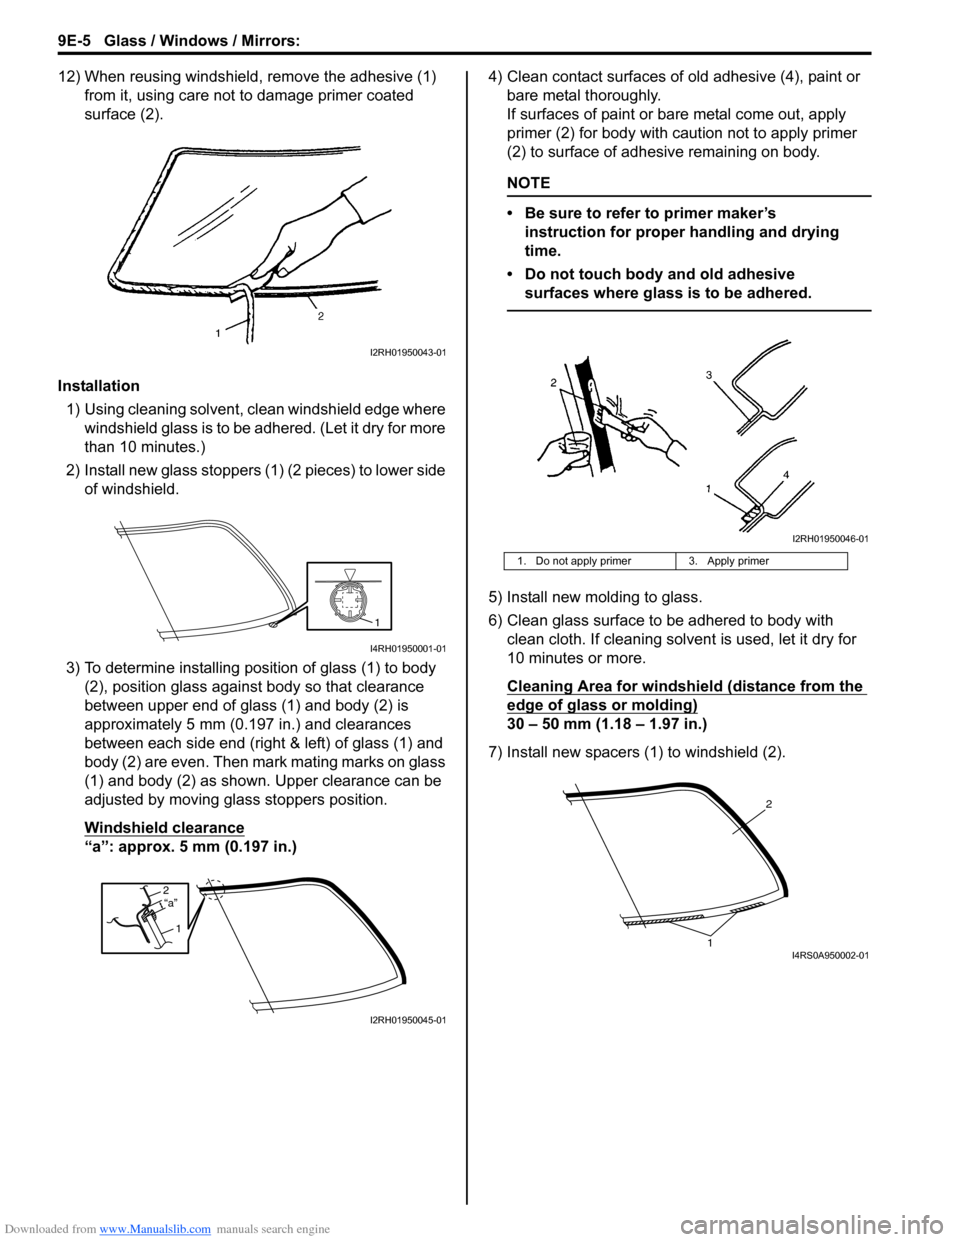 SUZUKI SWIFT 2008 2.G Service User Guide Downloaded from www.Manualslib.com manuals search engine 9E-5 Glass / Windows / Mirrors: 
12) When reusing windshield, remove the adhesive (1) from it, using care not to damage primer coated 
surface 